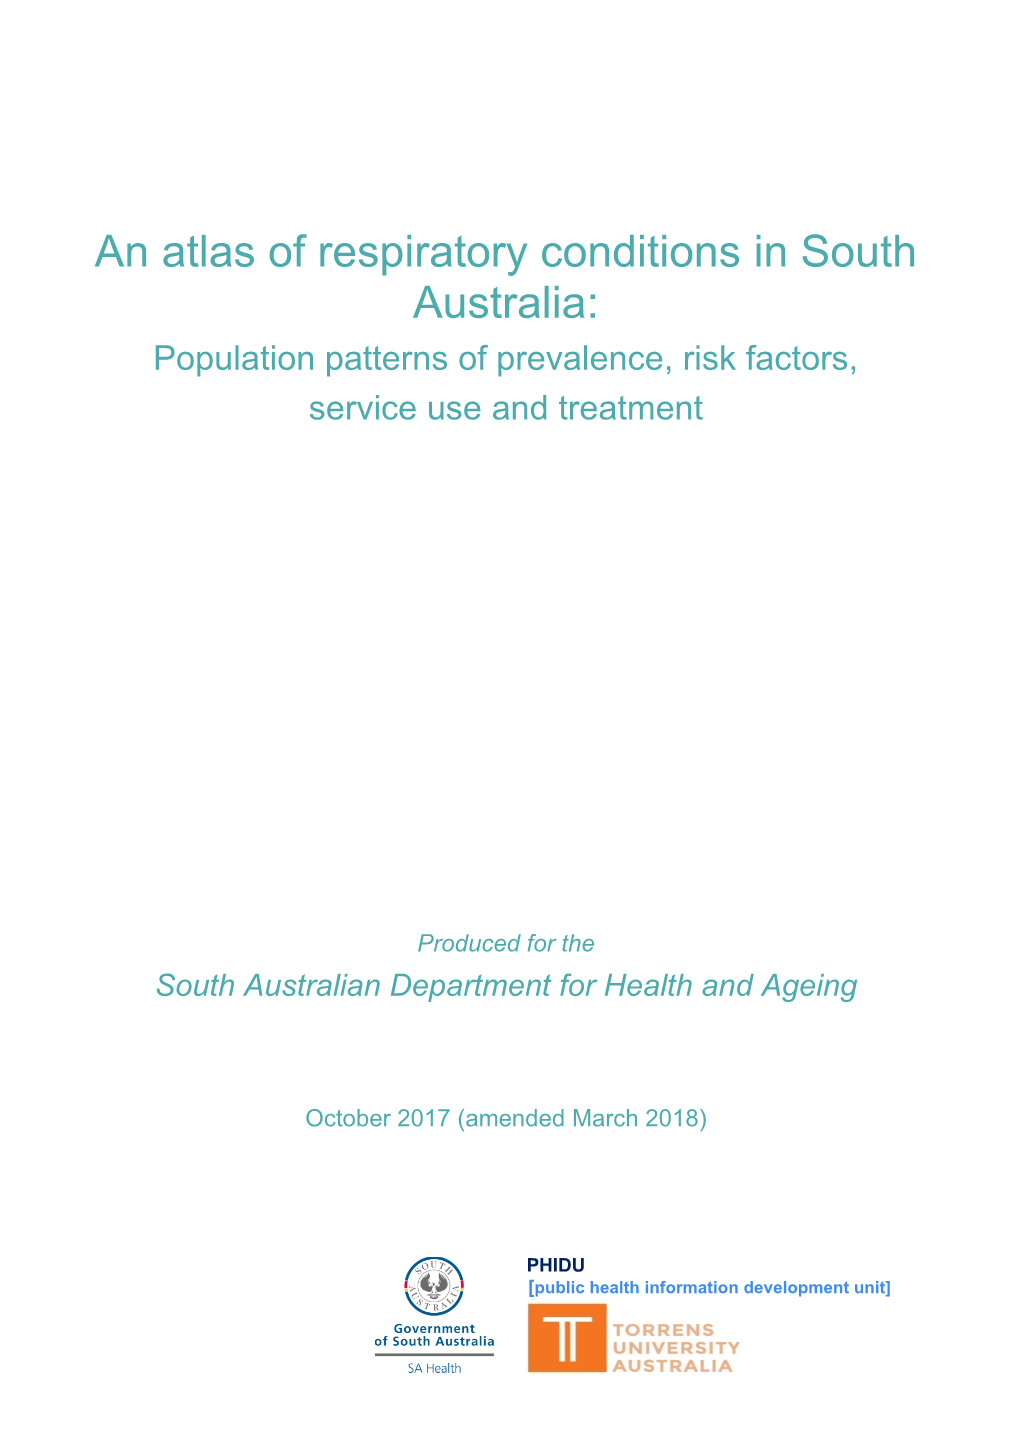 An Atlas of Respiratory Conditions in South Australia: Population Patterns of Prevalence, Risk Factors, Service Use and Treatment